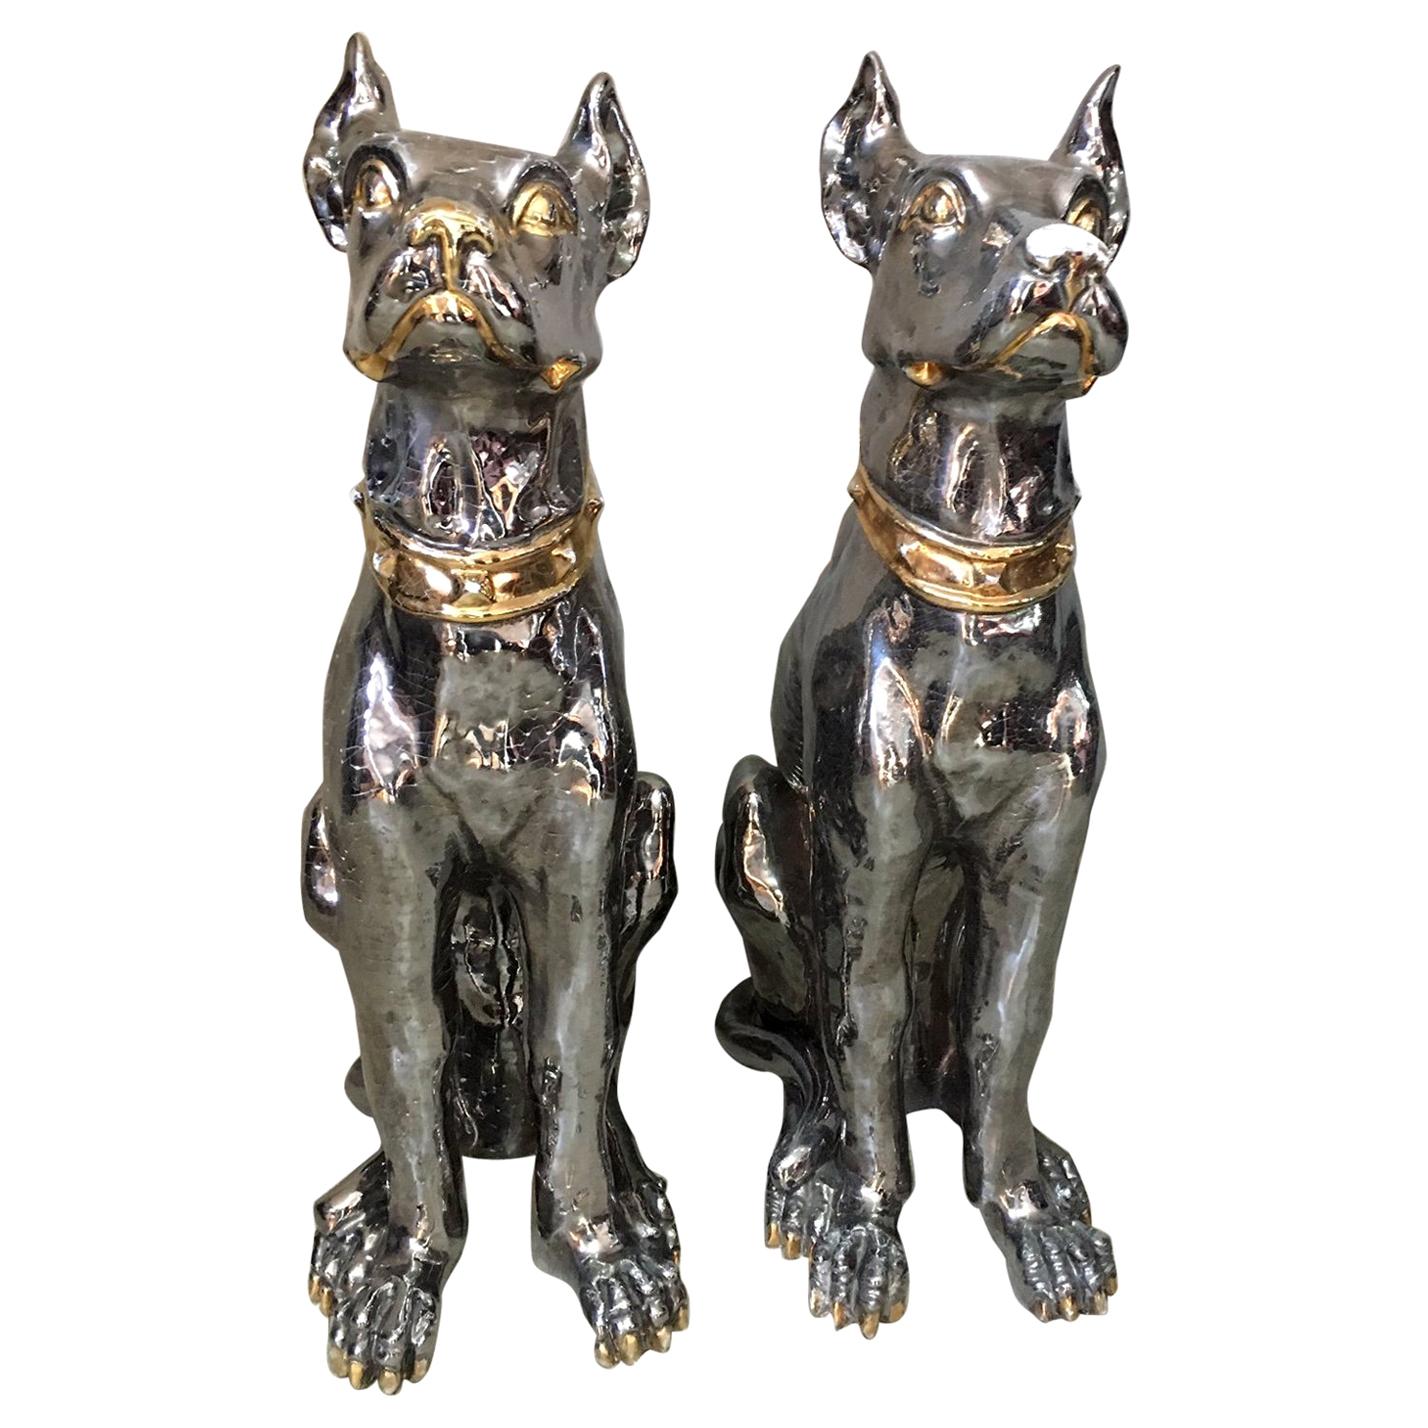 20th Century Italian Pair of Silver and Golden Ceramic Dogs, 1950s